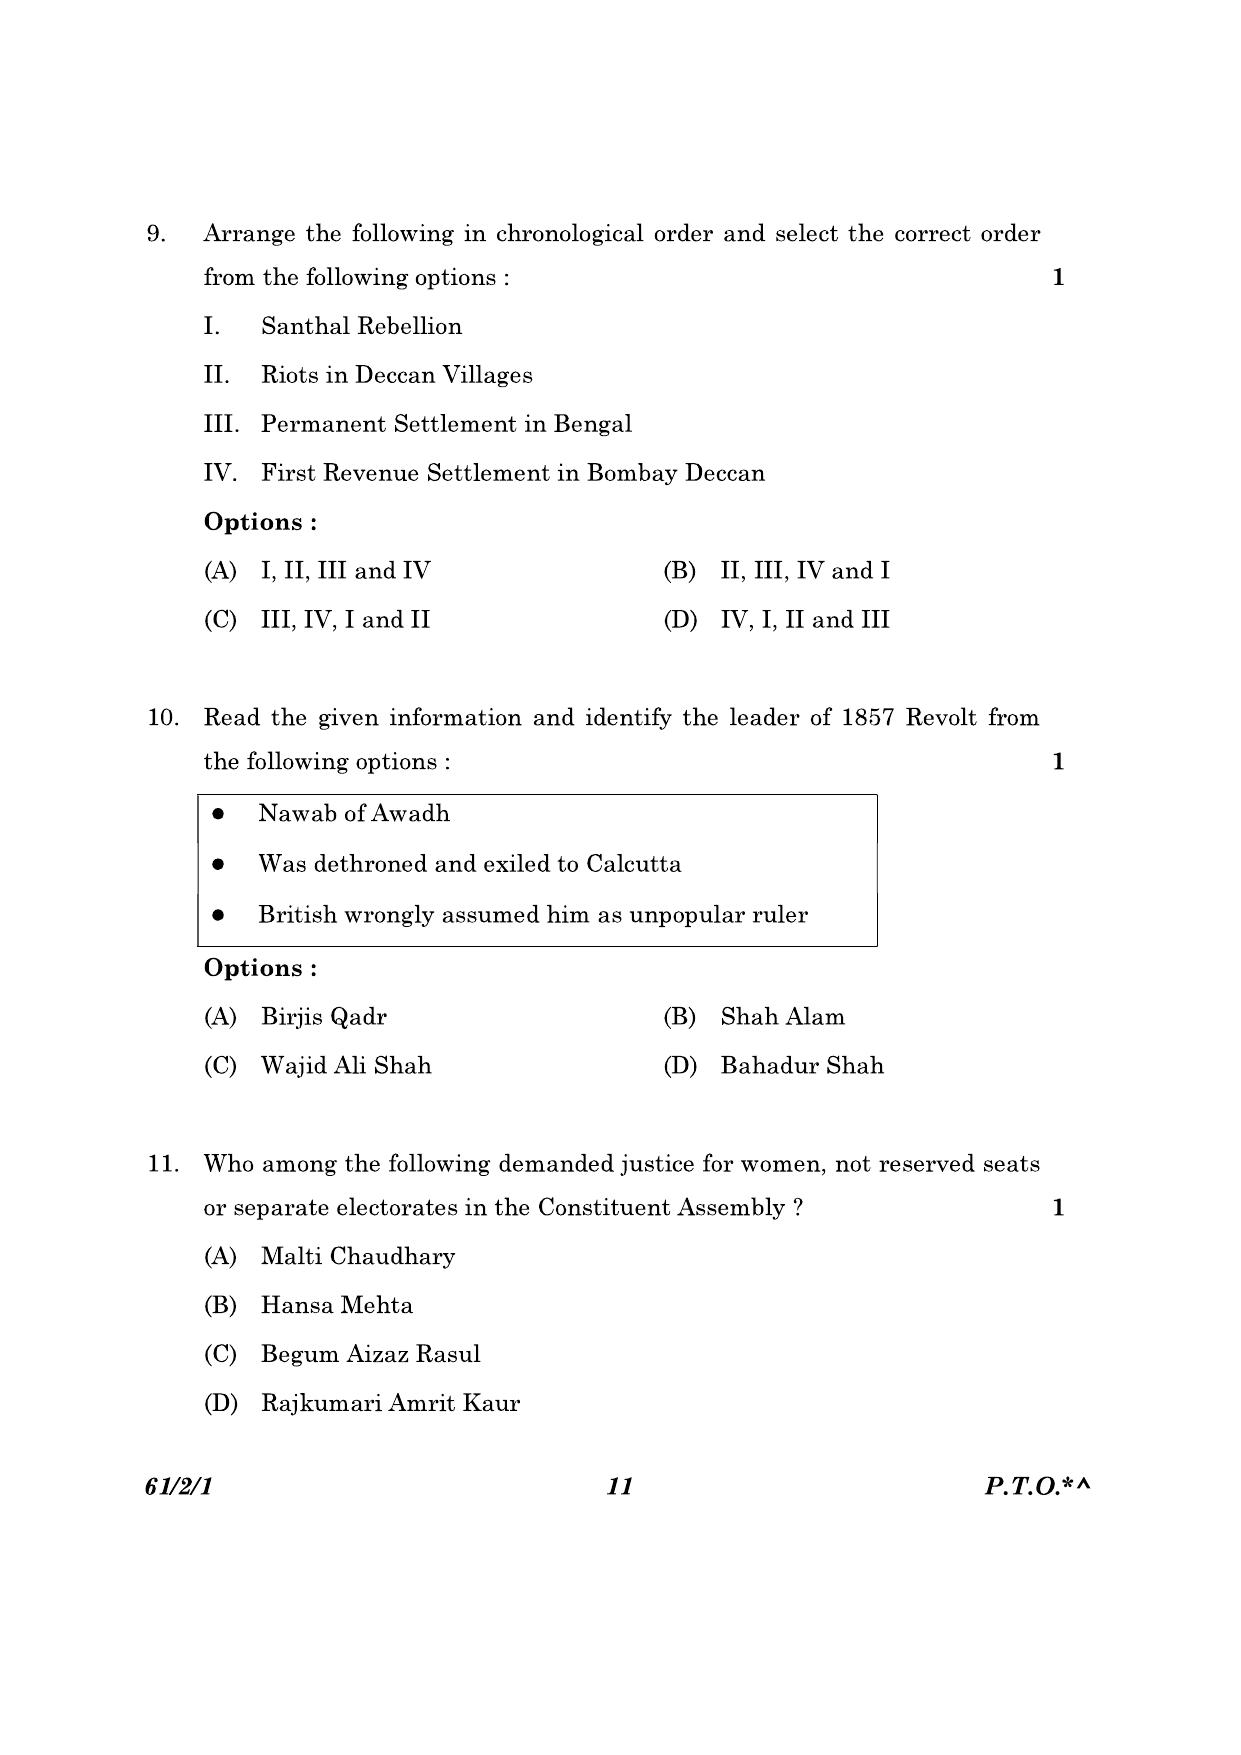 CBSE Class 12 61-2-1 History 2023 Question Paper - Page 11